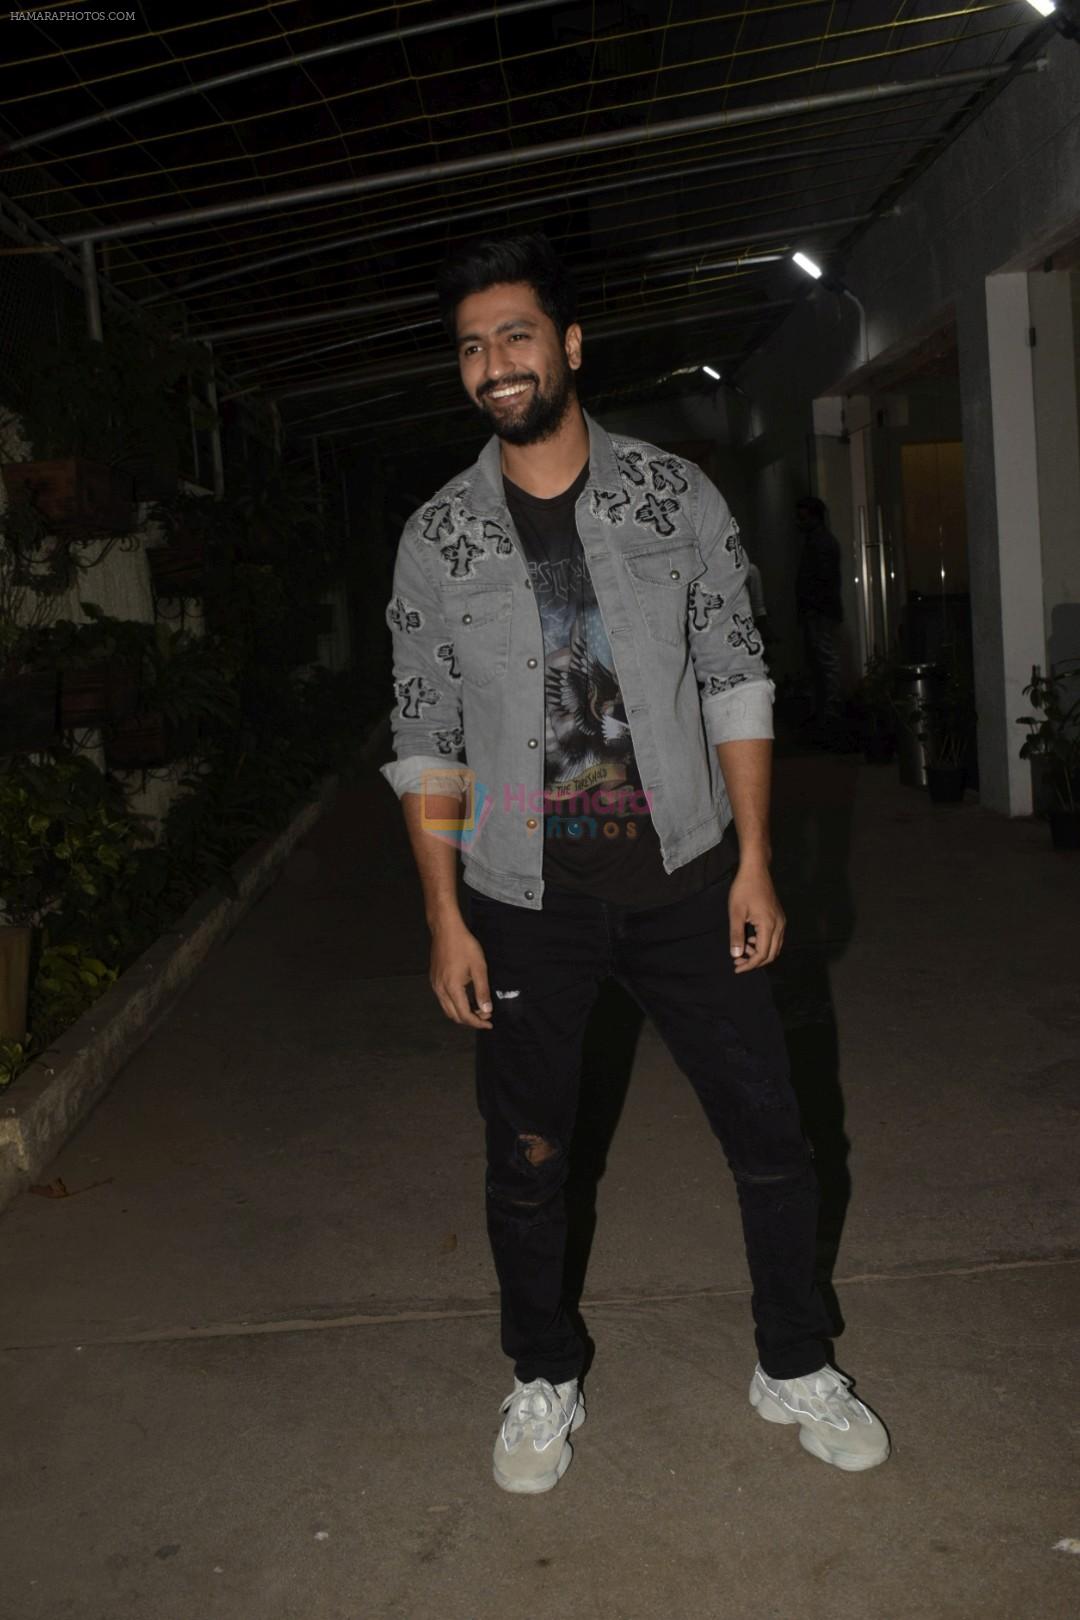 Vicky Kaushal at the Screening of film Uri in sunny sound juhu on 12th Jan 2019